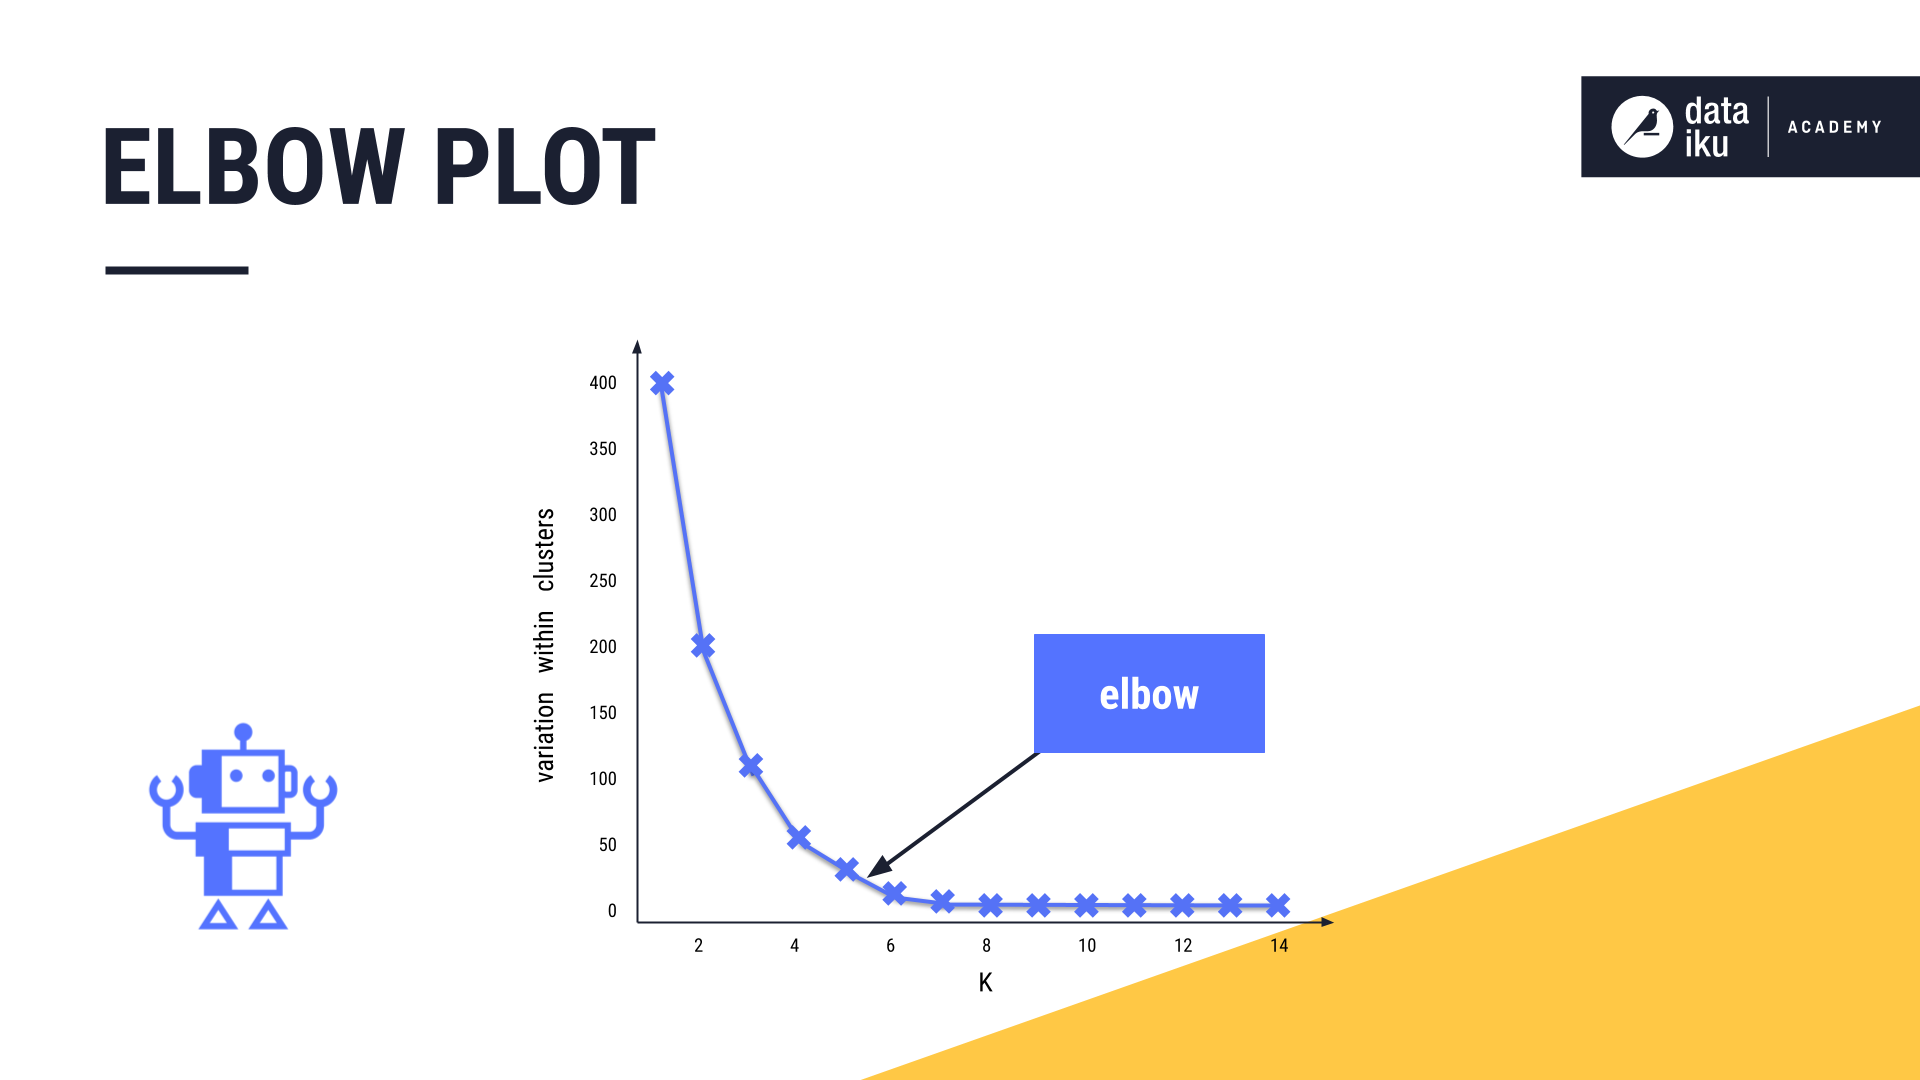 ../../_images/elbow-plot-elbow.png